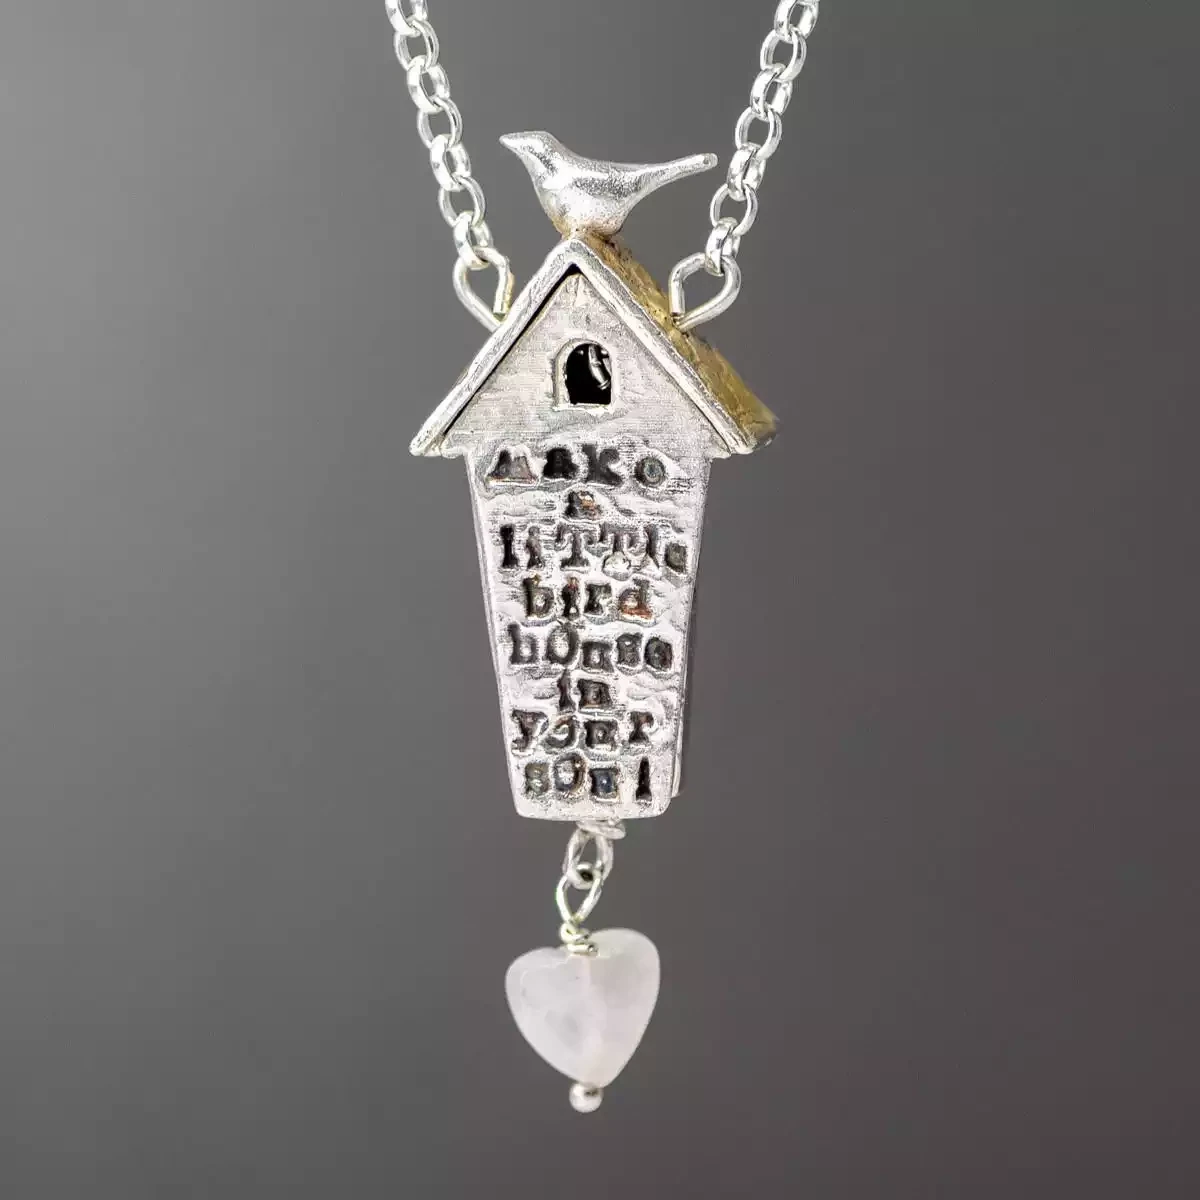 Little Bird House Silver and Gold Plate Necklace by Xuella Arnold